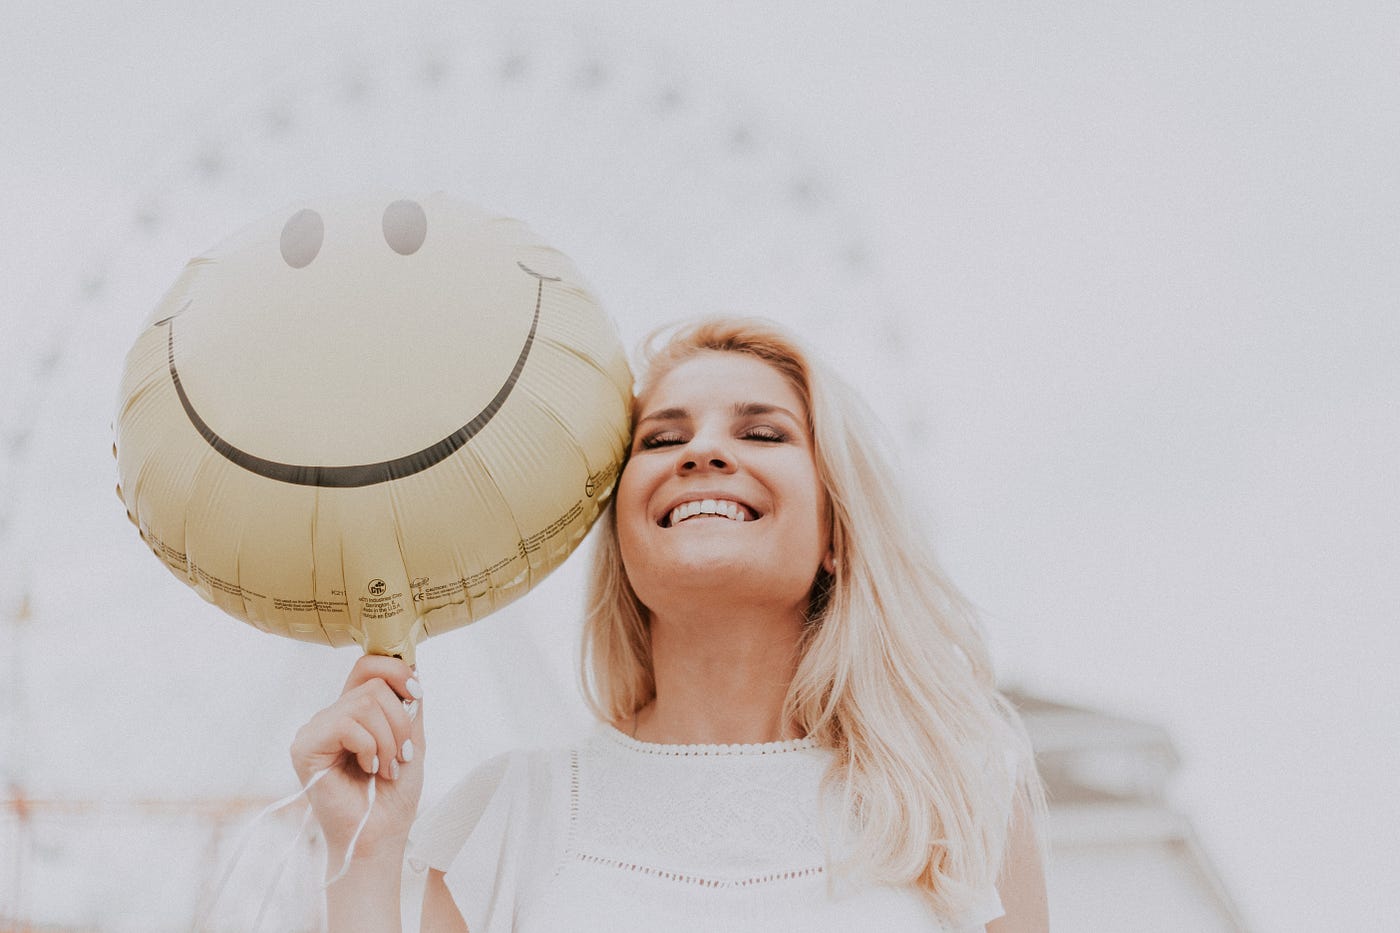 What Is Positivity? The Definition May Surprise You